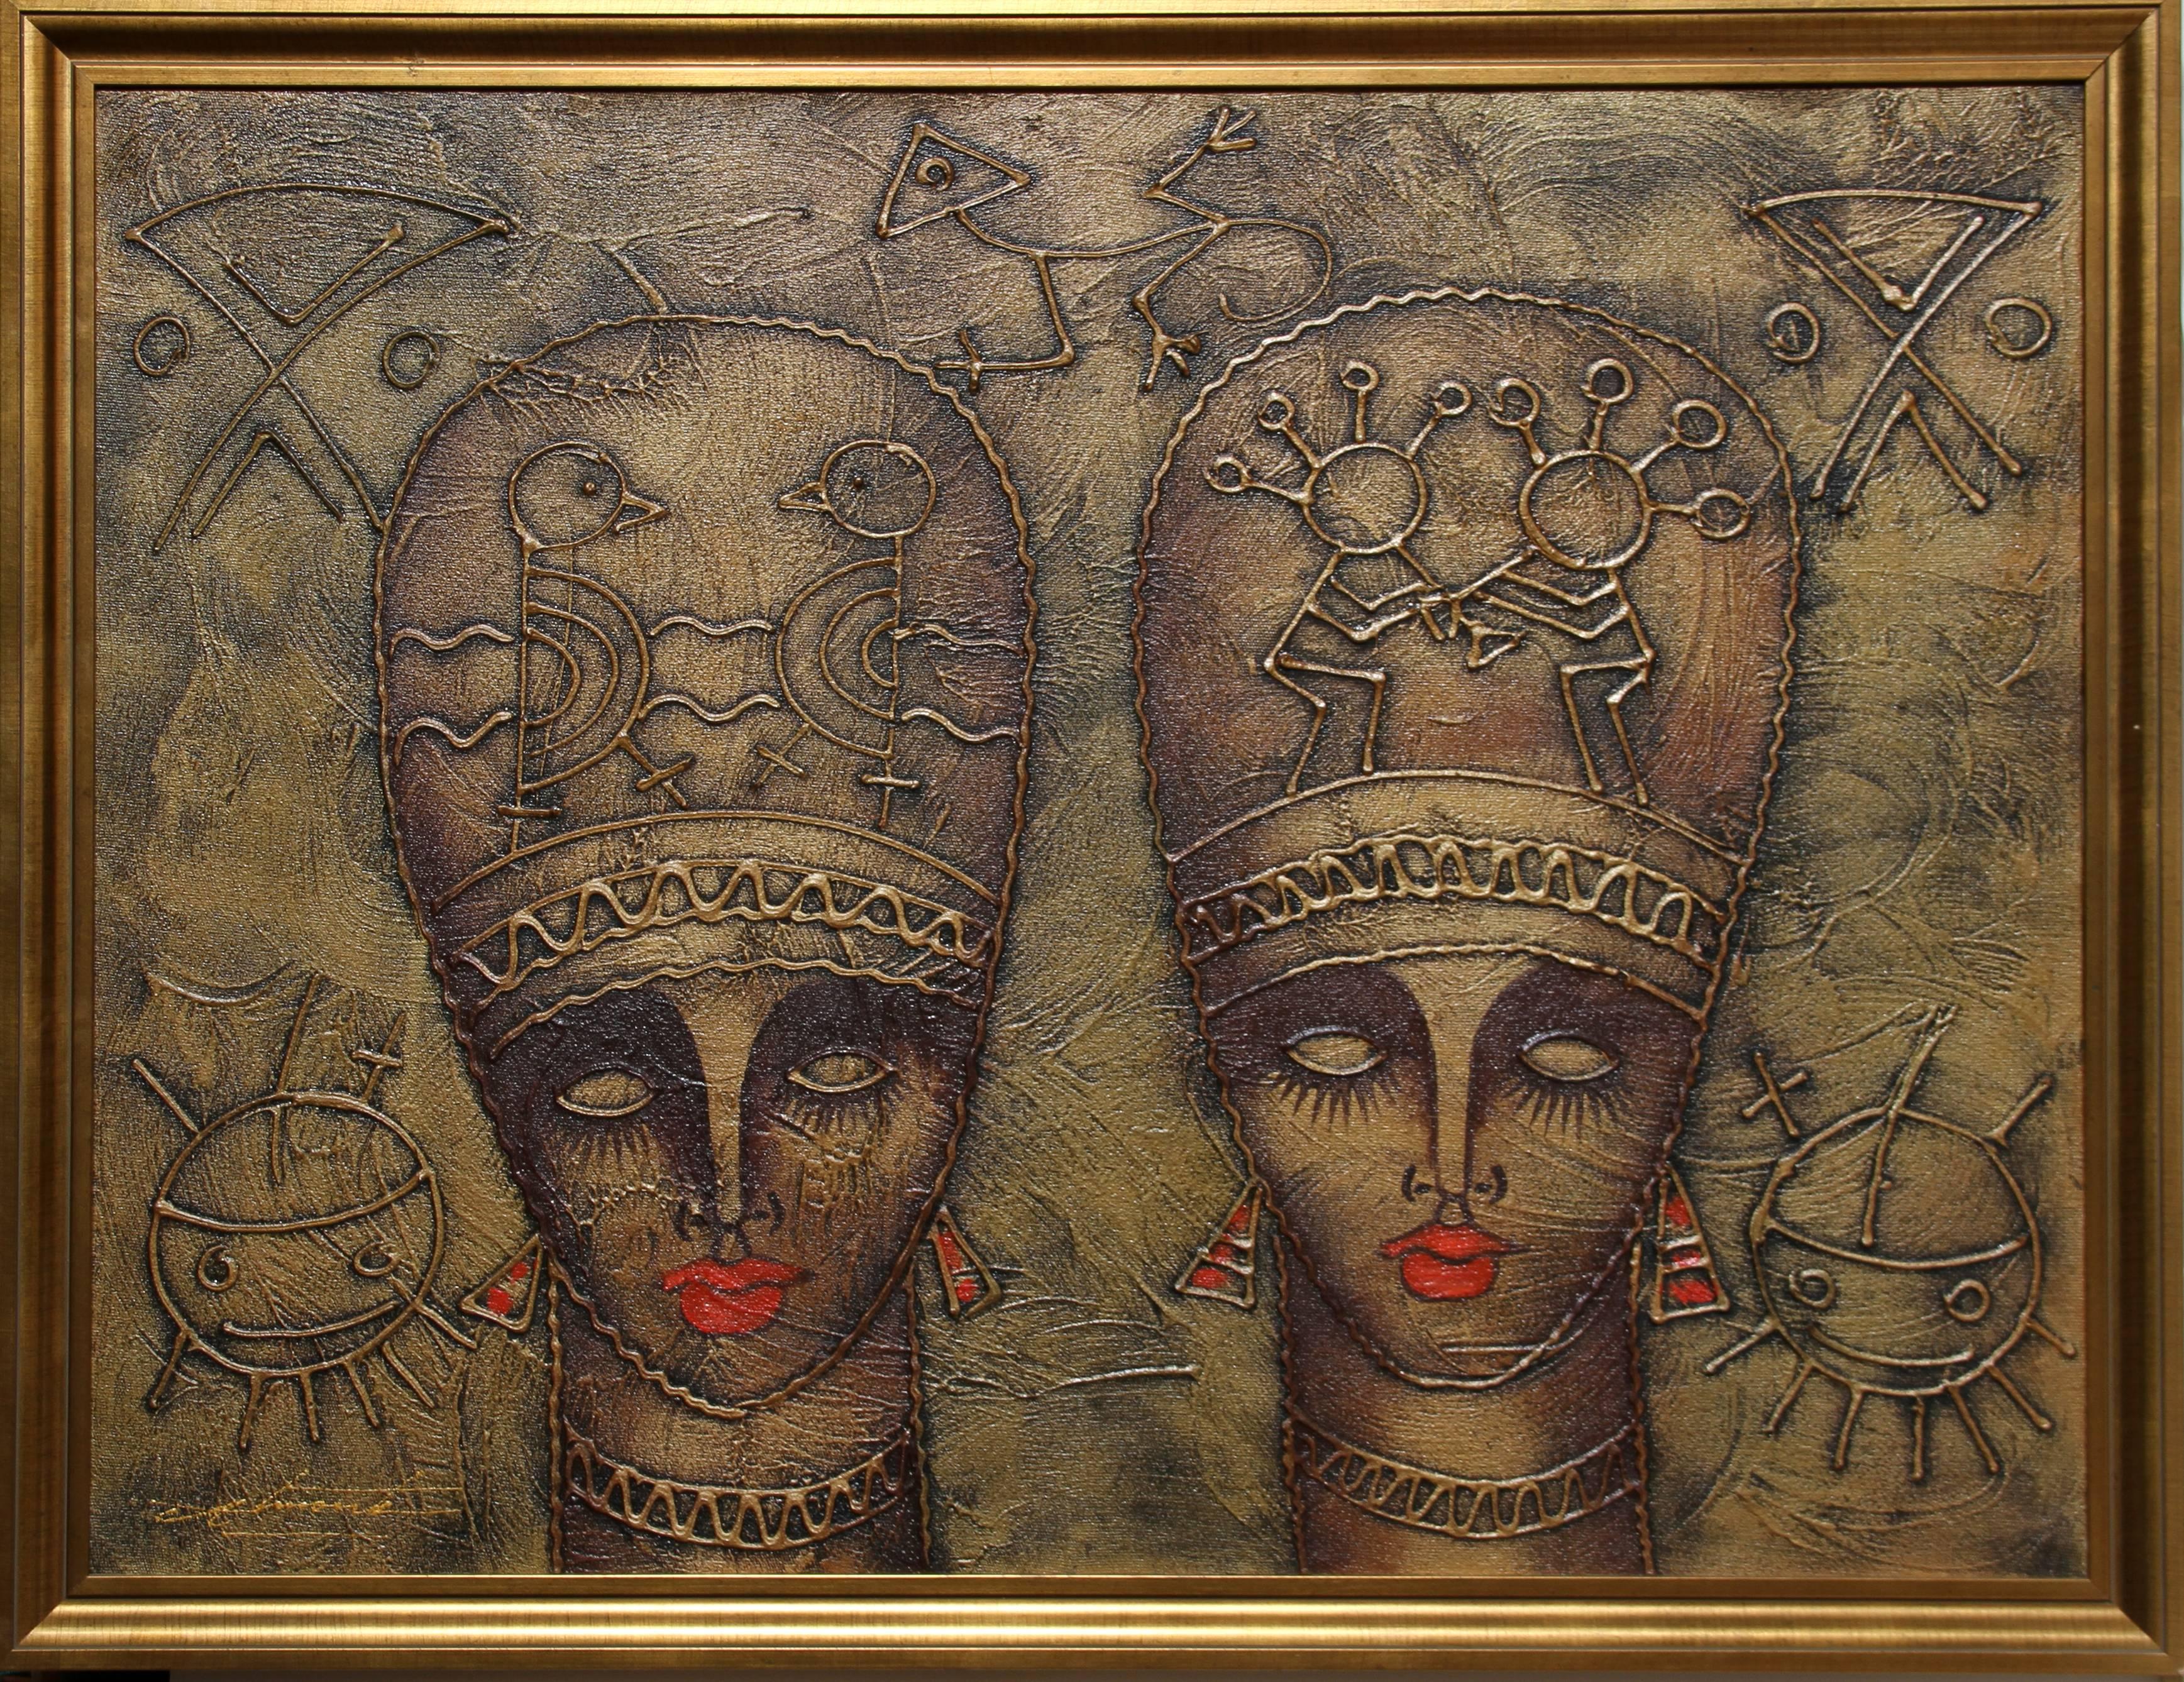 This oil painting on canvas was created by Dominican artist Tony Almonte. The painting is signed in the upper left hand corner and measures 30 x 40 inches. It is displayed in a 33.5 x 43.5 inch gold frame and is in excellent condition.